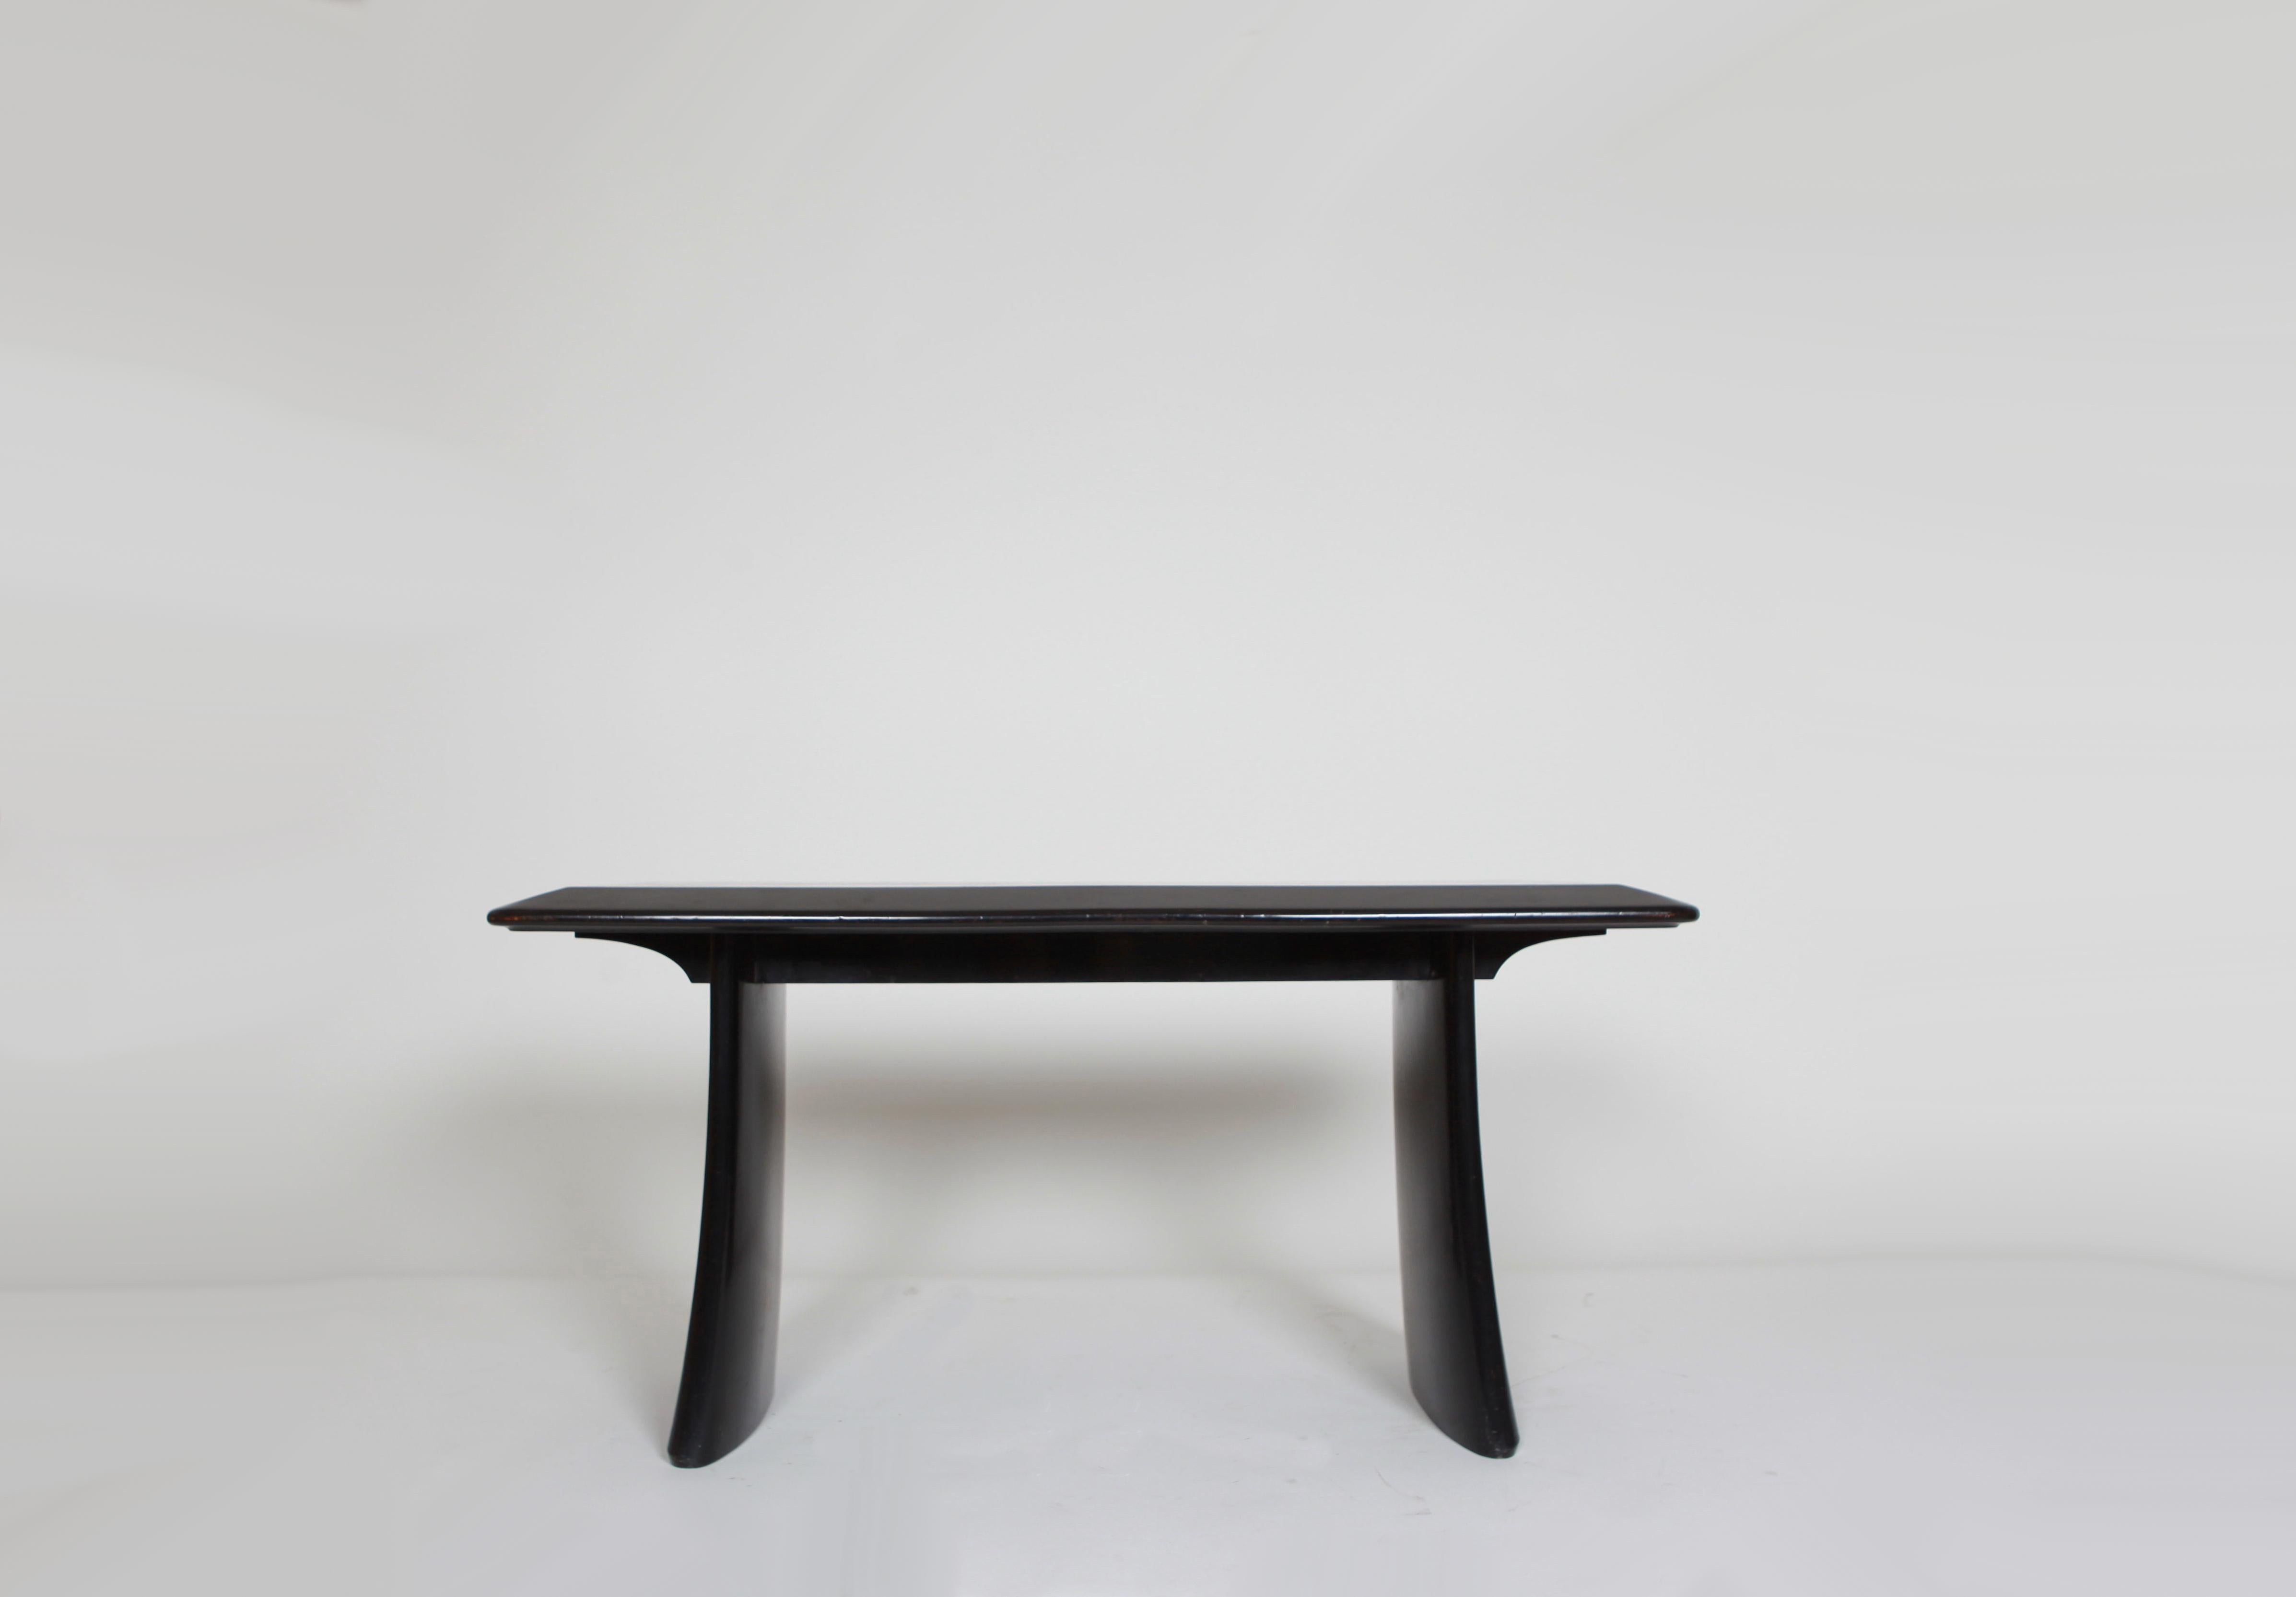 Side table by Vittorio Valabrega, circa 1930, in ebonized wood. Great condition.

Vittorio Valabrega (1861–1952) was an Italian artist and designer. The Valabrega Brothers company was opened in Turin in 1884. It became known for the production